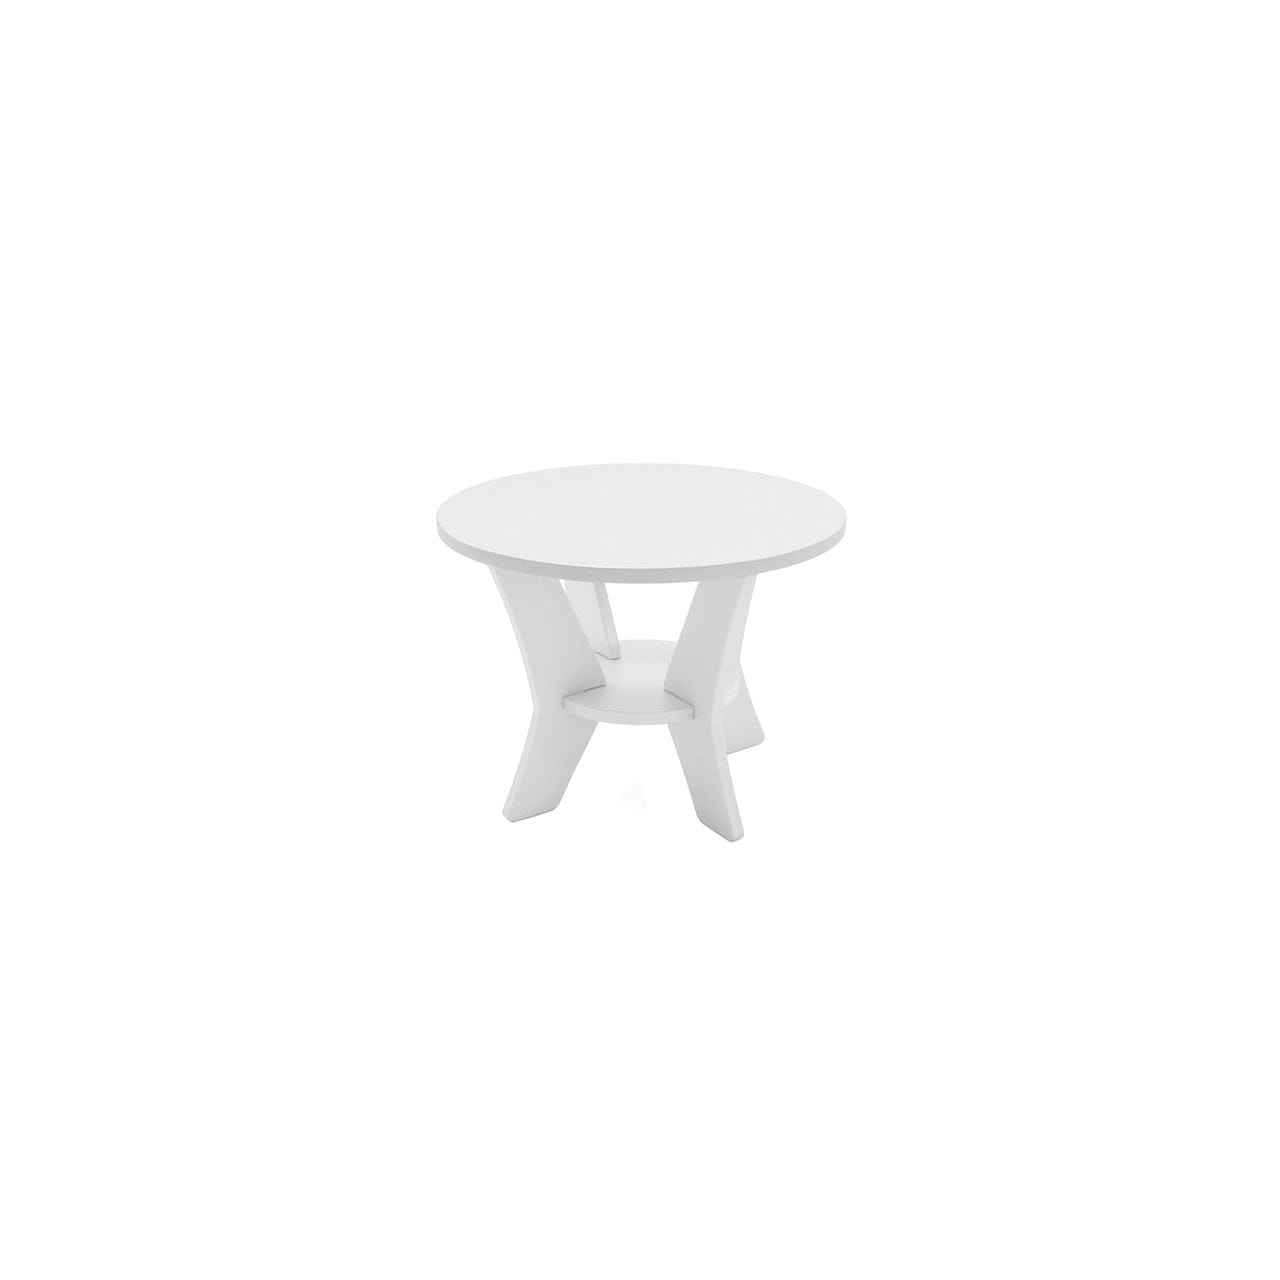 Ledge Lounger Mainstay Round Side Table